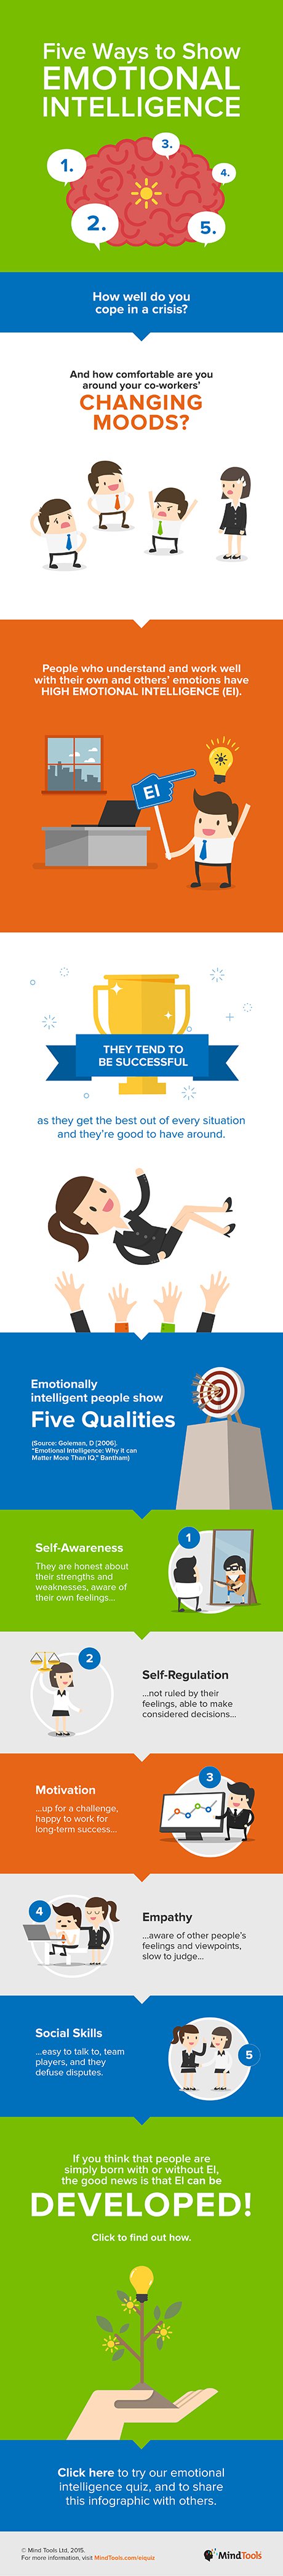 Five ways to show emotional intelligence infographic